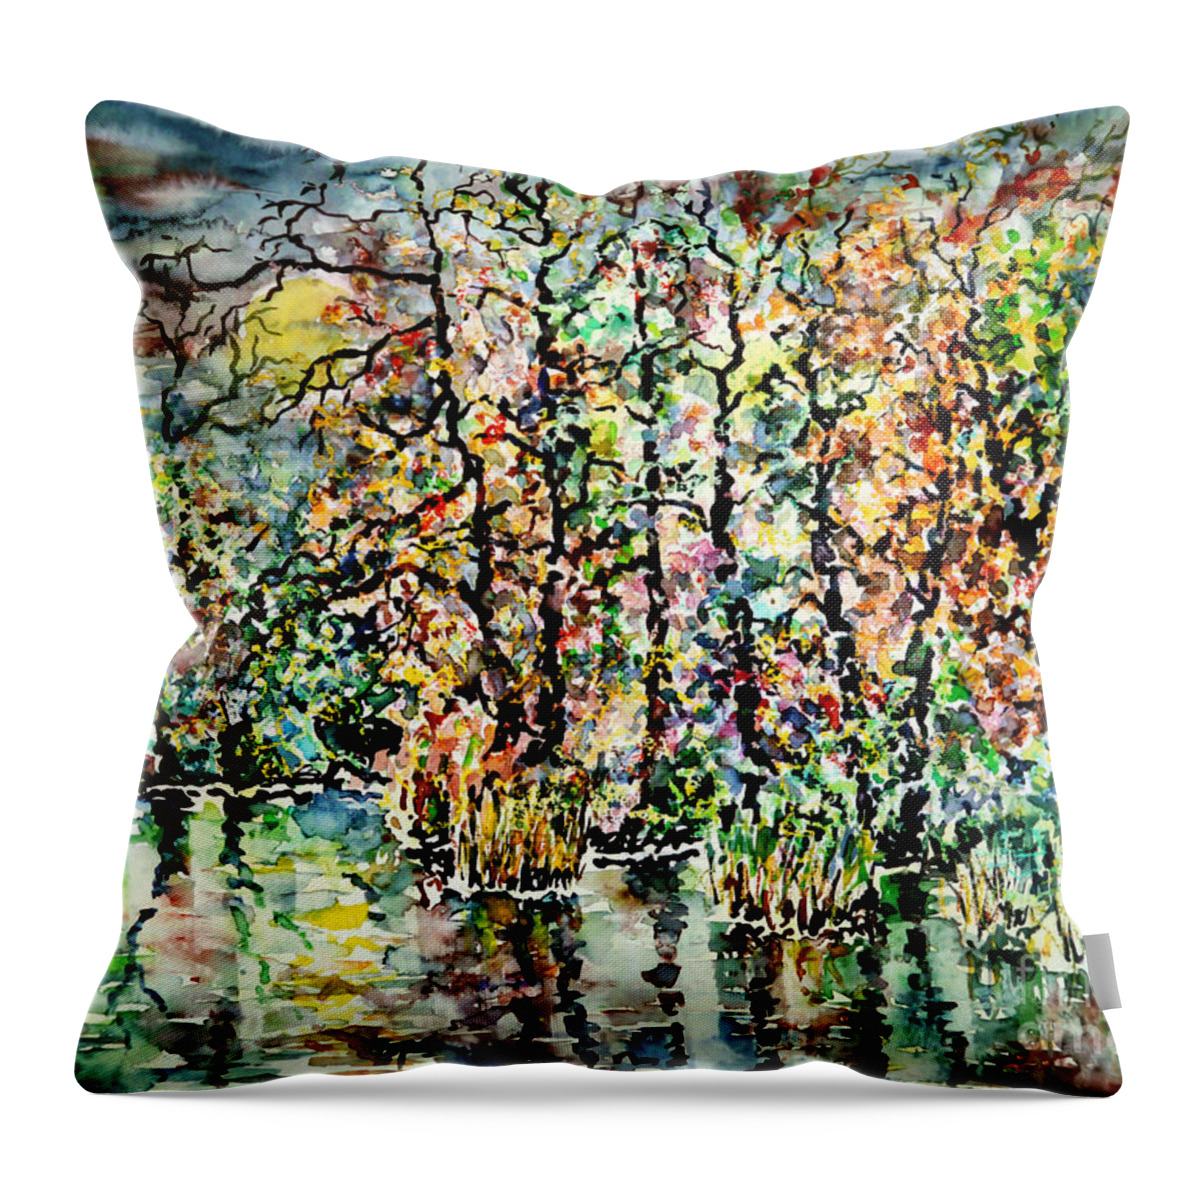 Watercolour Throw Pillow featuring the painting Moonlight Shadow by Almo M